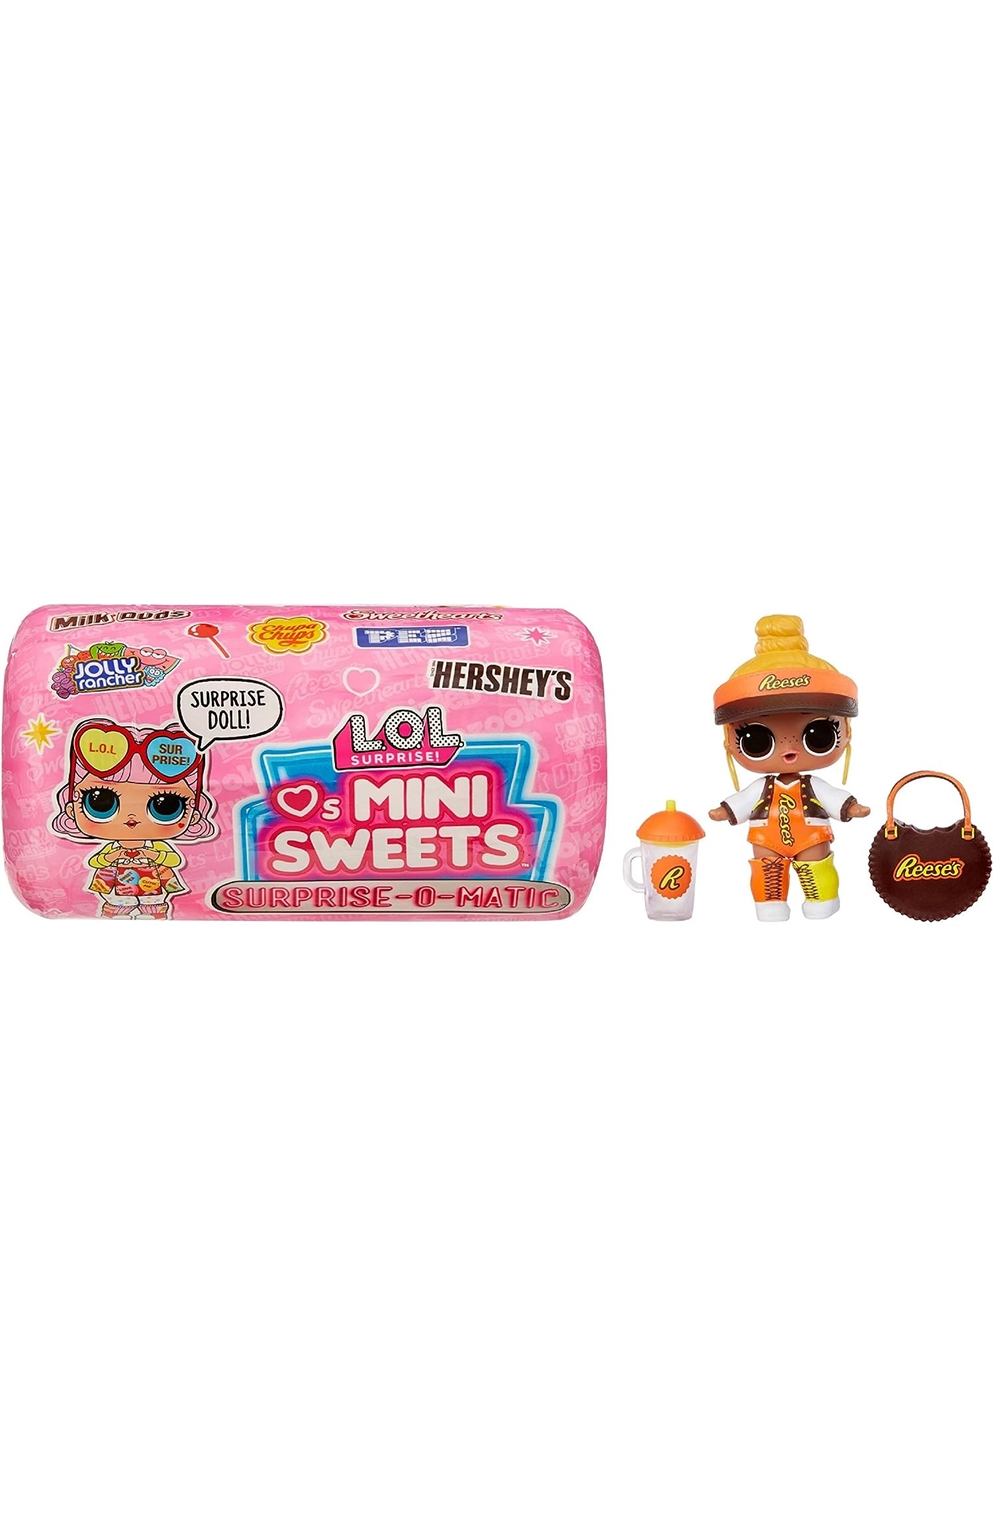 Lol Surprise Loves Mini Sweets Surprise-O-Matic Dolls 2 Pack